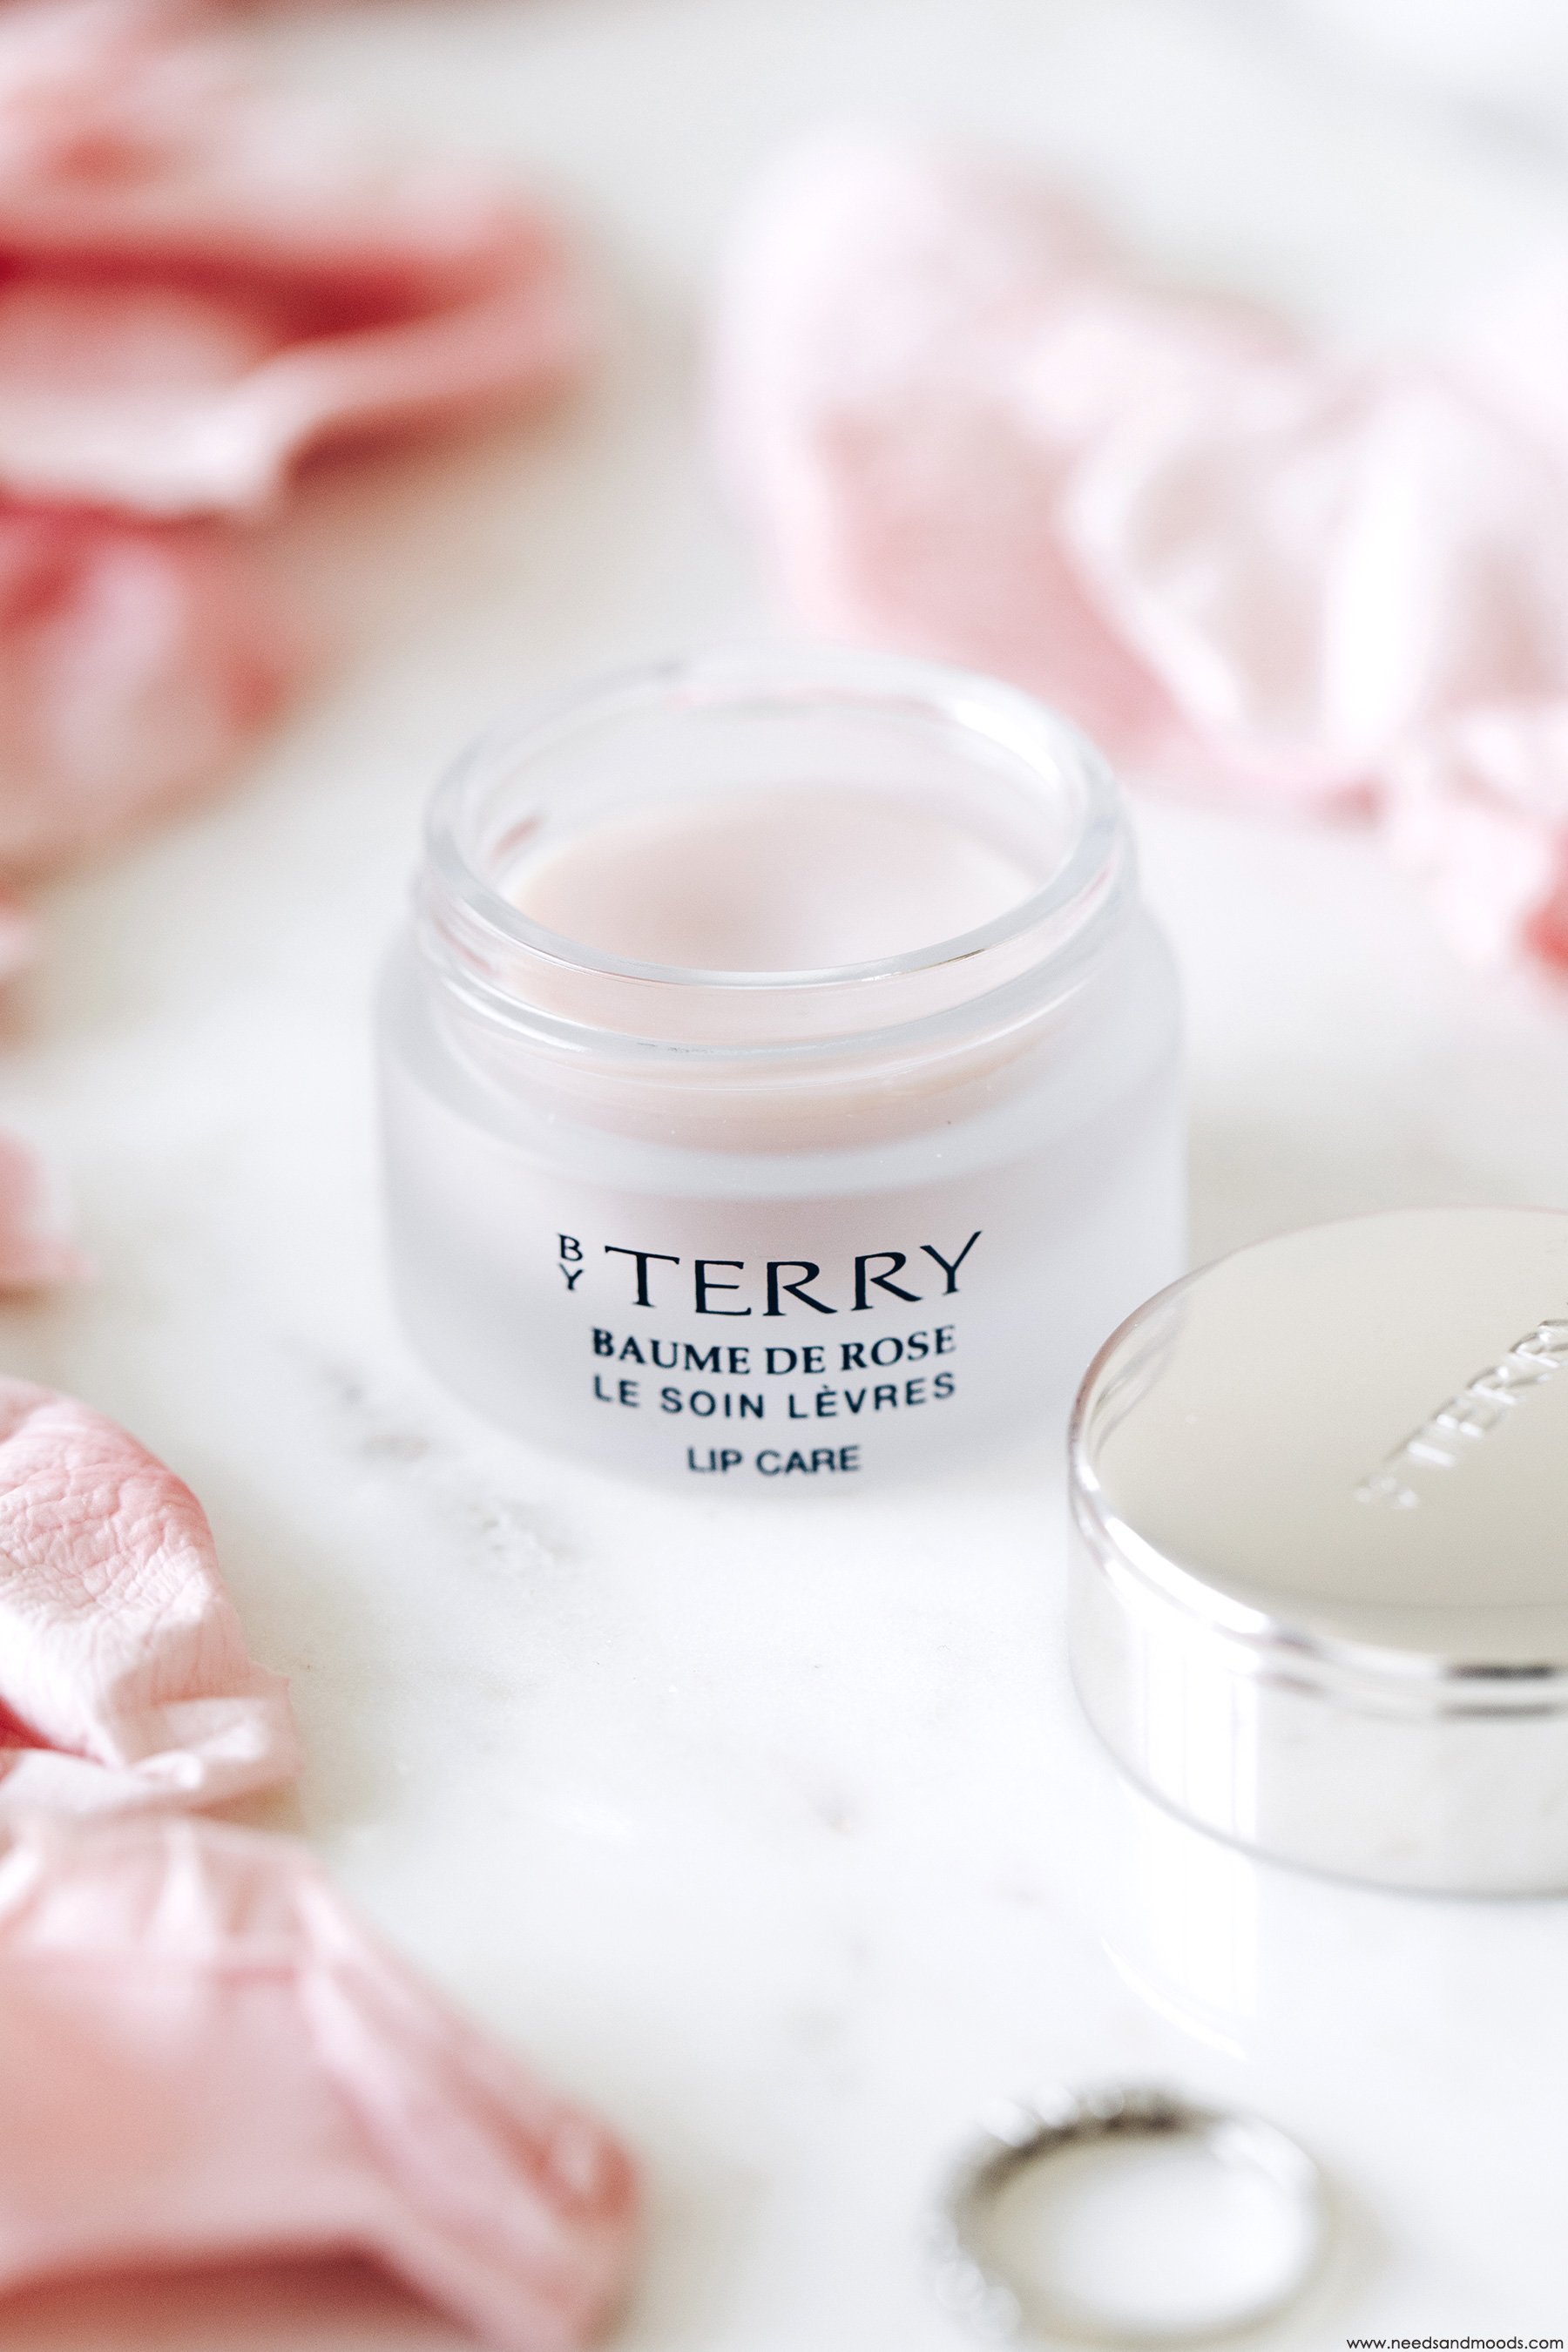 baume de rose by terry